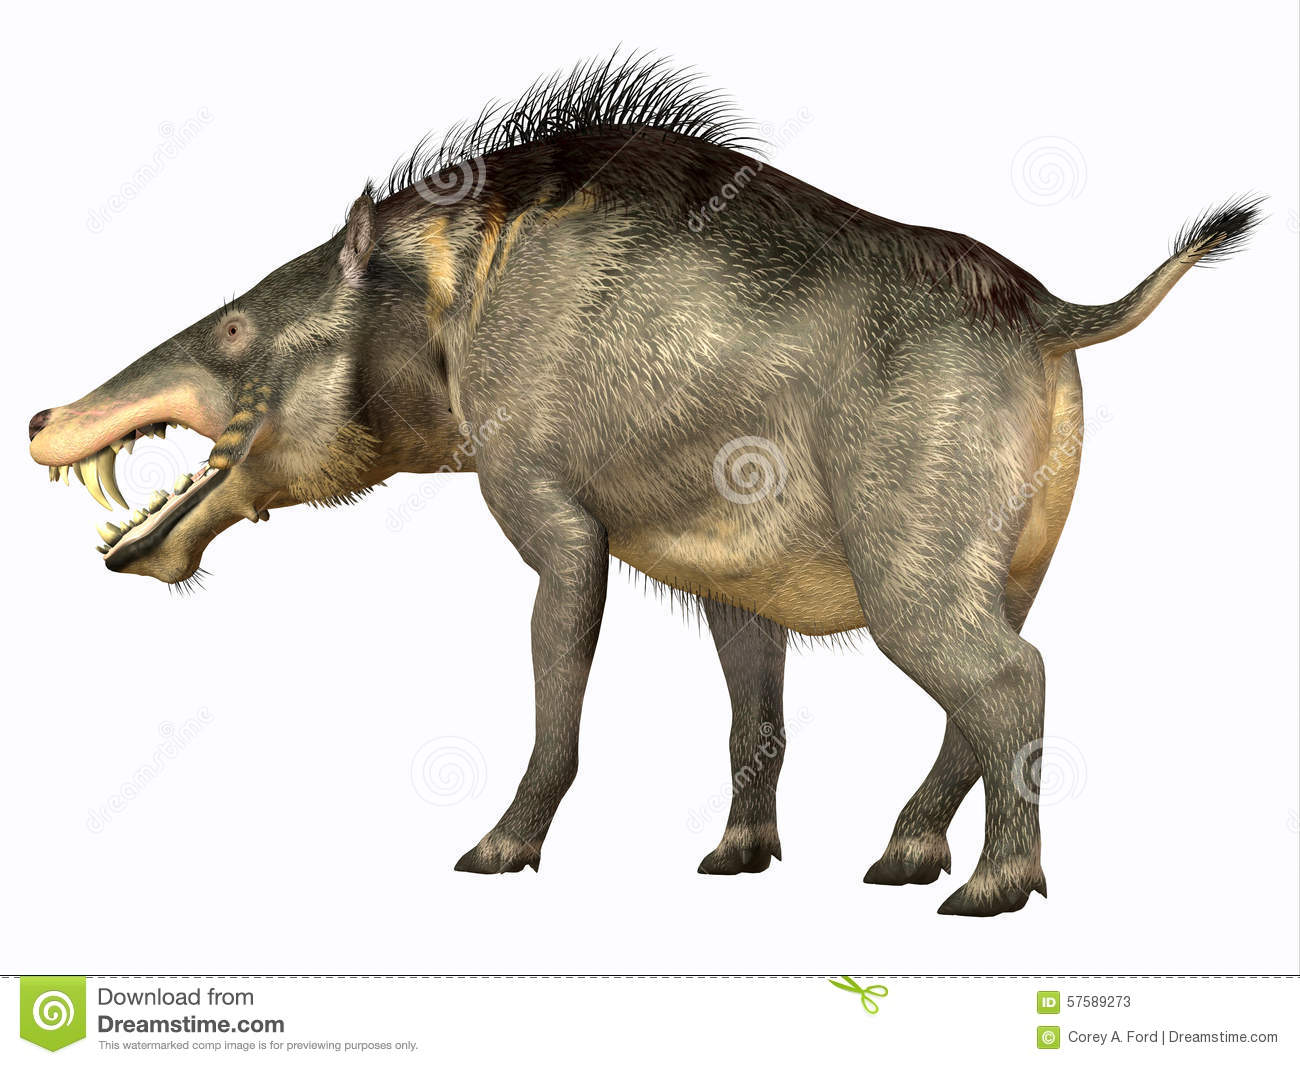 Entelodon Was An Omnivorous Pig That Lived In Europe And Asia In The